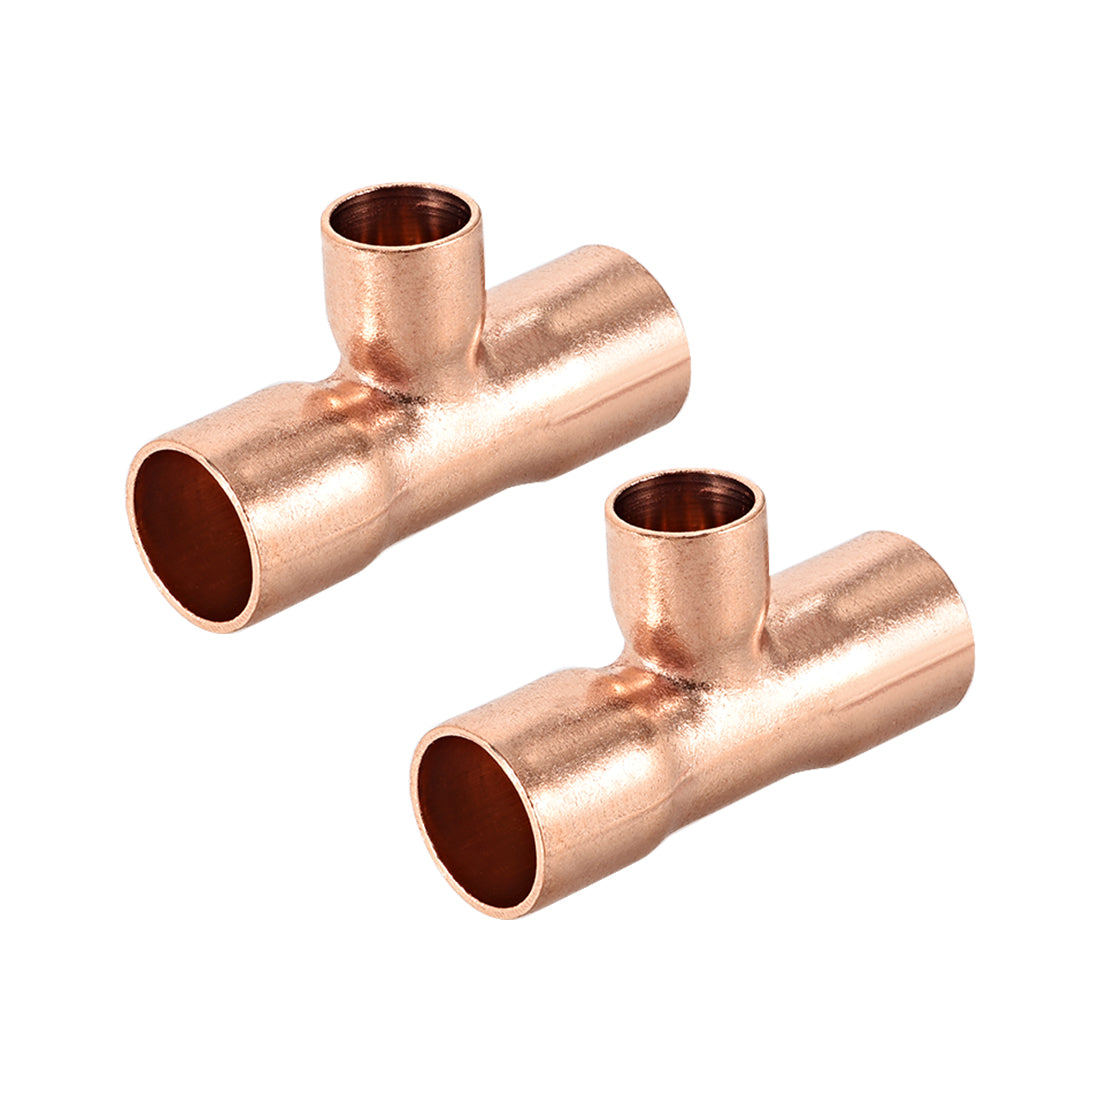 uxcell Uxcell 1/2-inch x 1/4-inch x 1/2-inch Copper Reducing Tee Copper Pressure Pipe Fitting Conector  for Plumbing Supply and Refrigeration 2pcs